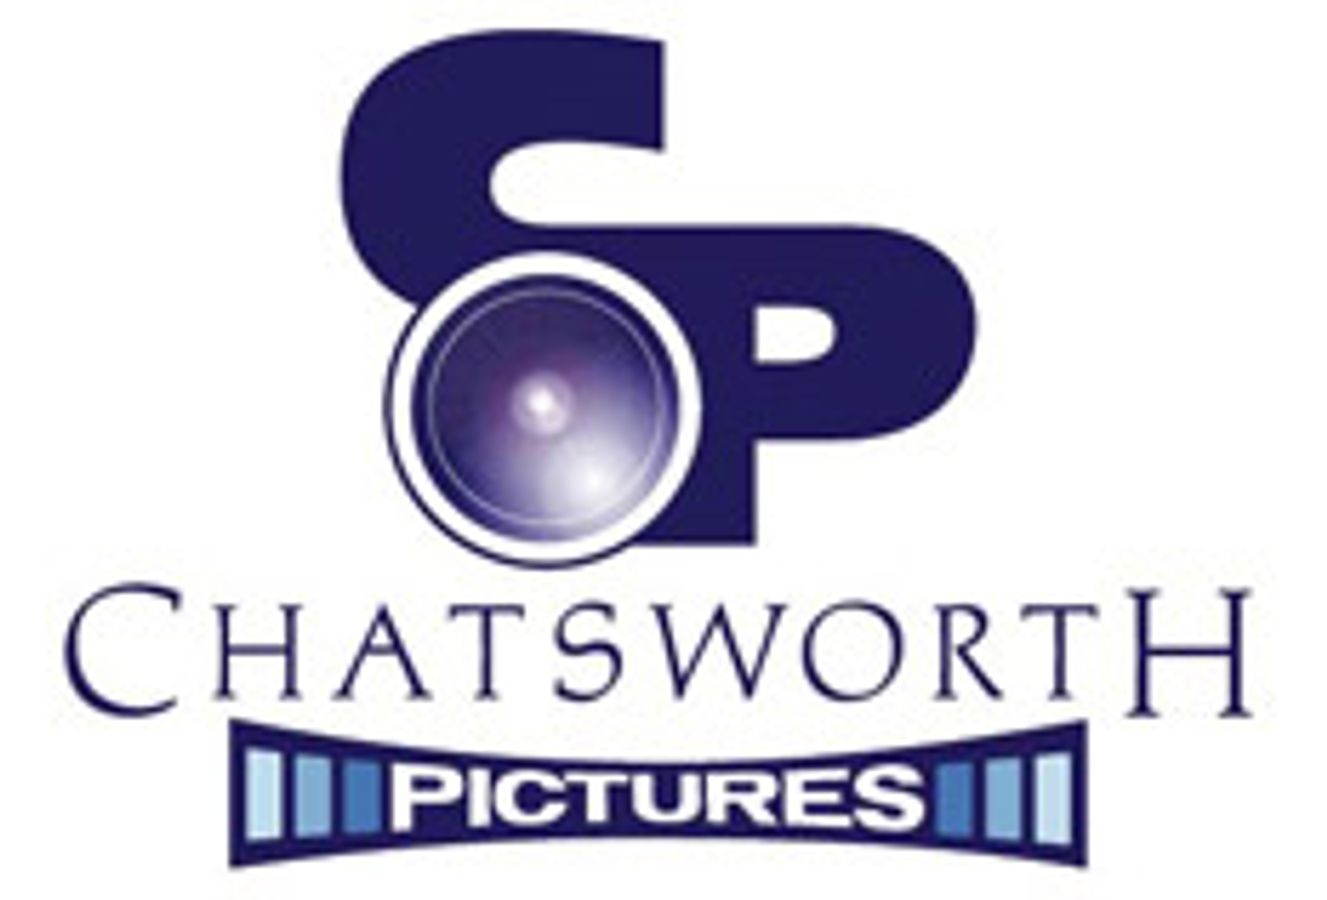 Chatsworth Pictures